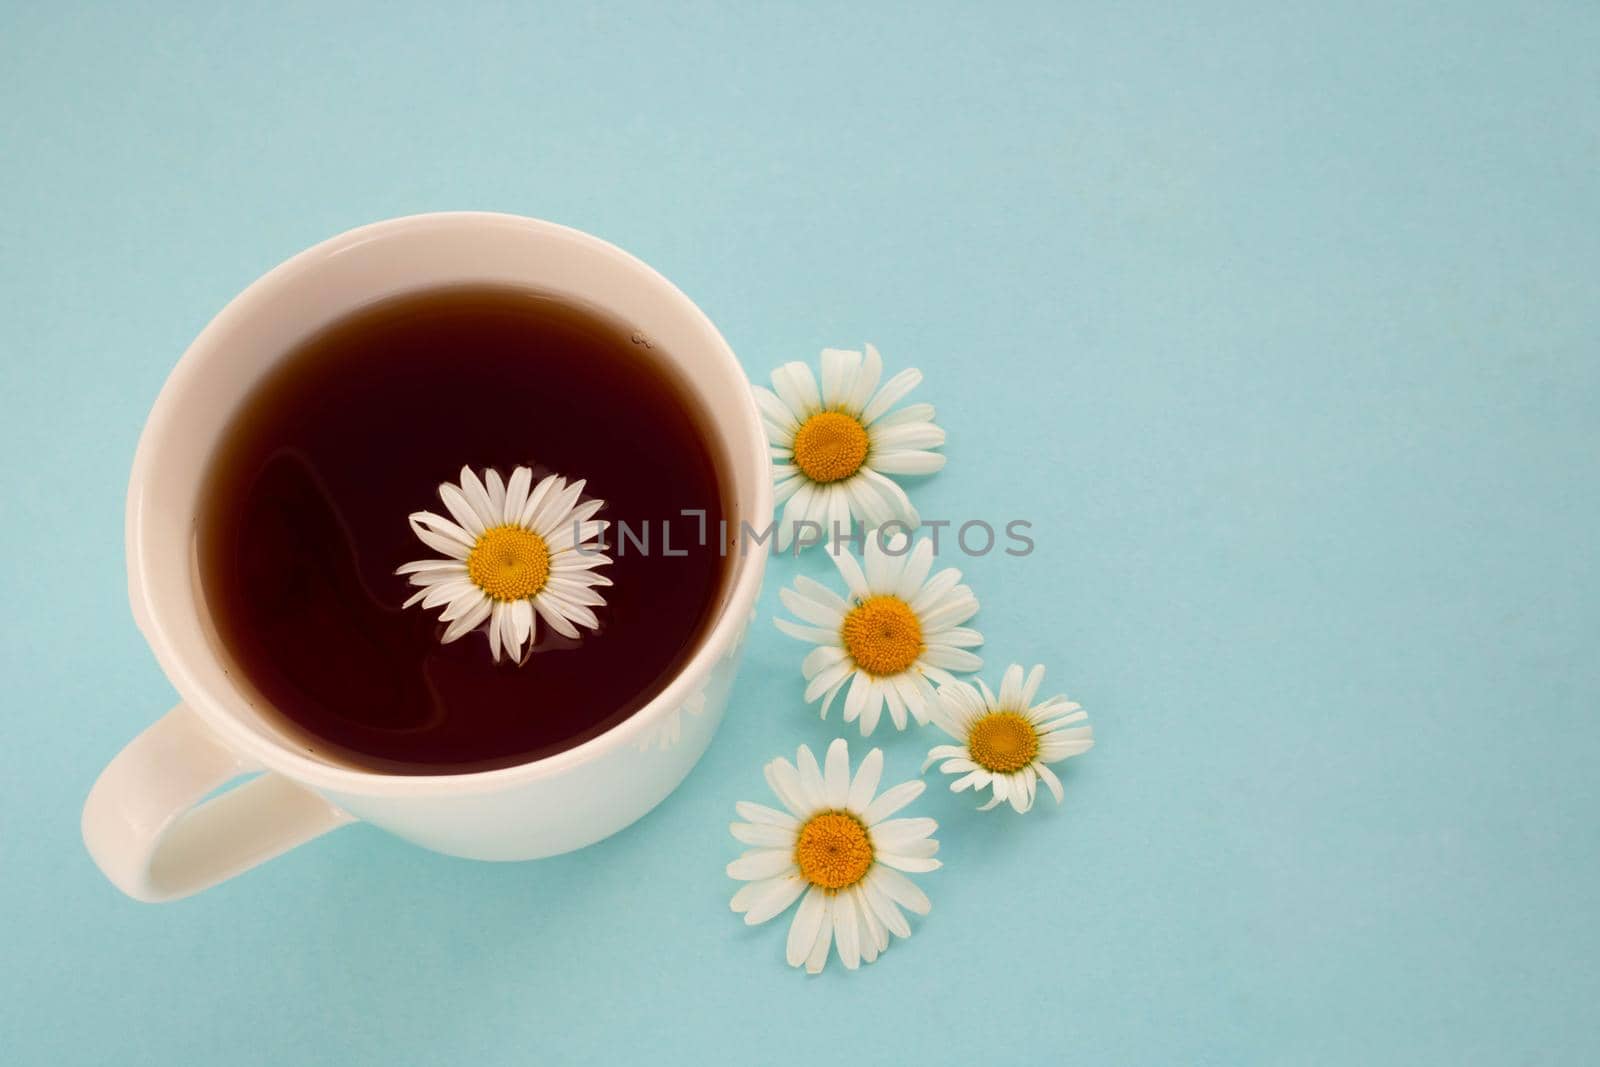 On a blue background, a white cup with tea and daisies by lapushka62